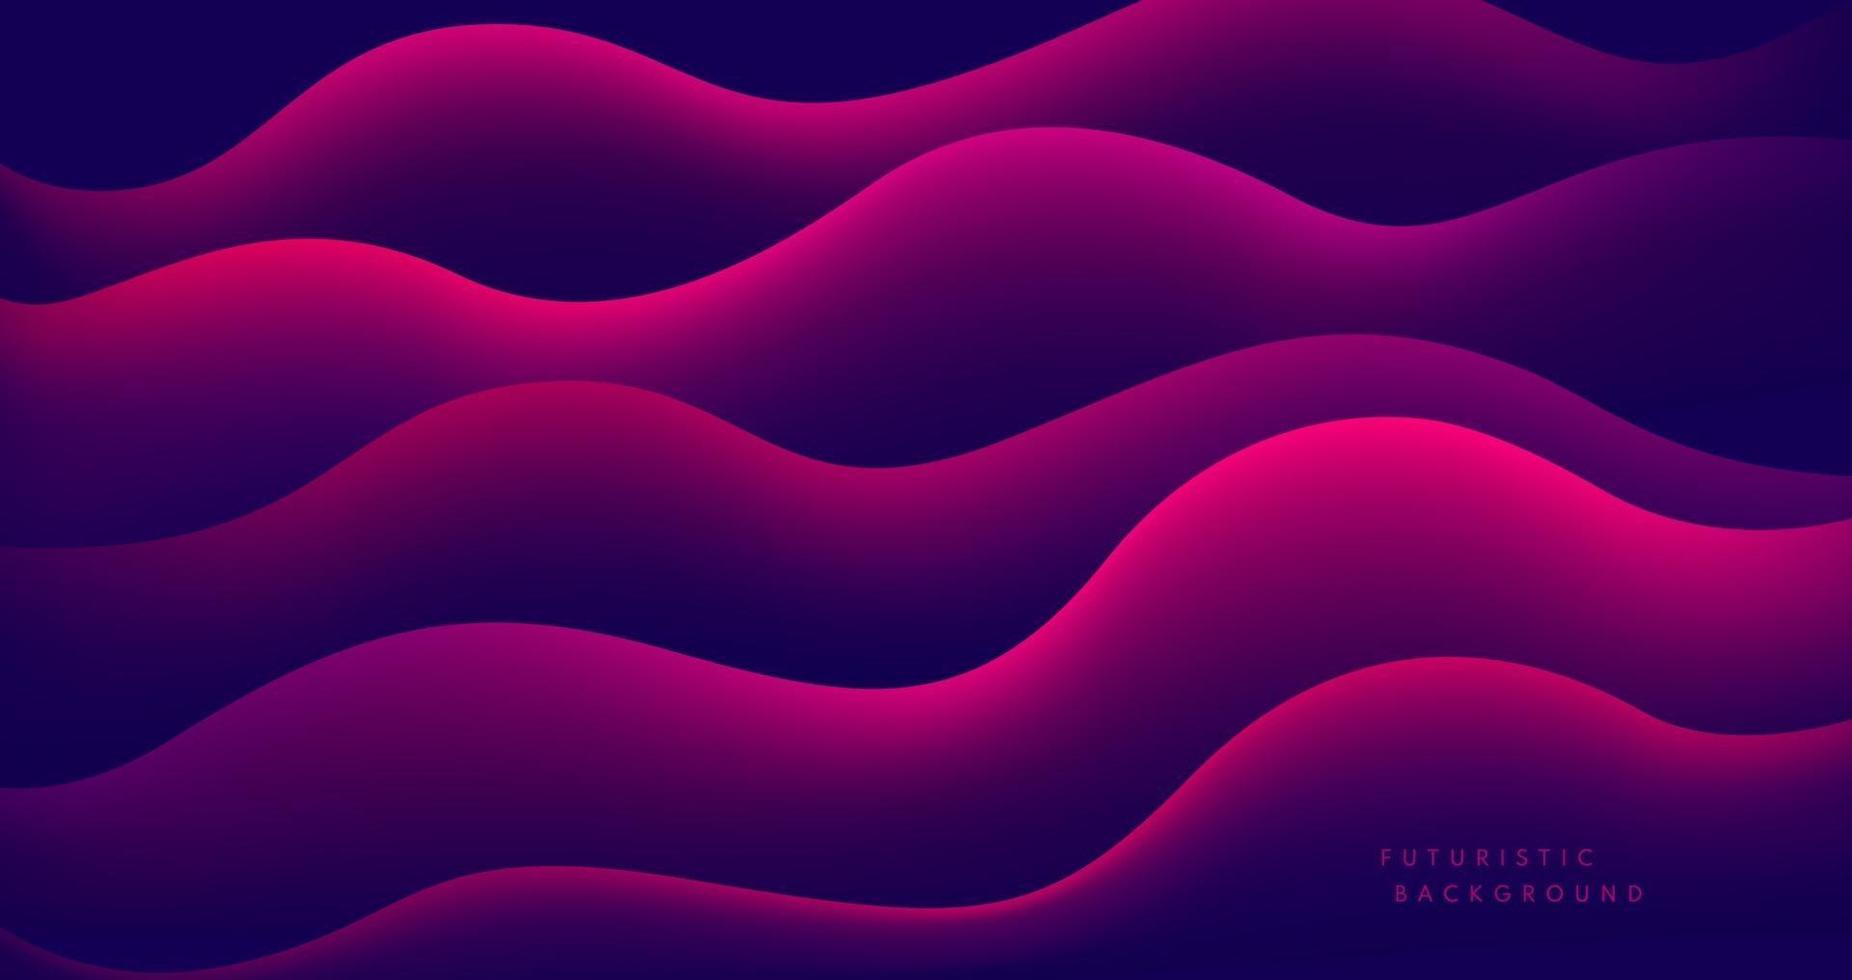 Abstract modern graphic element. Fluid shapes composition. Dynamical pink purple waves forms on dark blue background. Trendy gradient geometric template. Vector illustration.